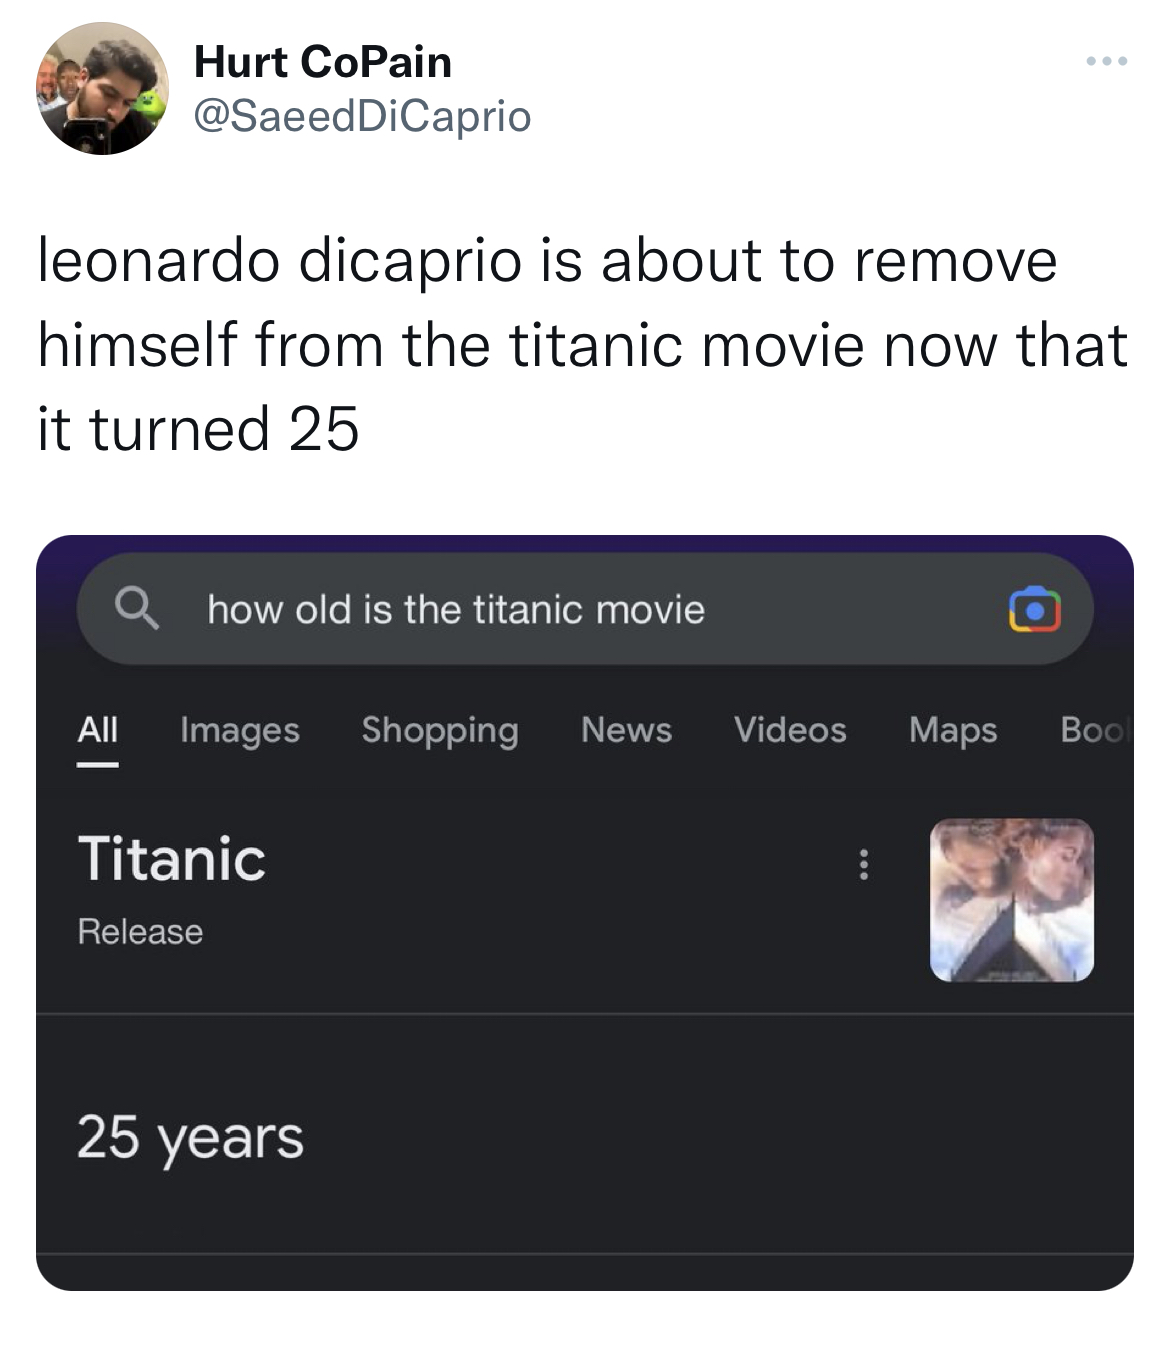 Leonardo DiCaprio Girlfriend Memes - software - Hurt CoPain DiCaprio All leonardo dicaprio is about to remove himself from the titanic movie now that it turned 25 how old is the titanic movie Images Shopping News Videos Maps Bool Titanic Release 25 years